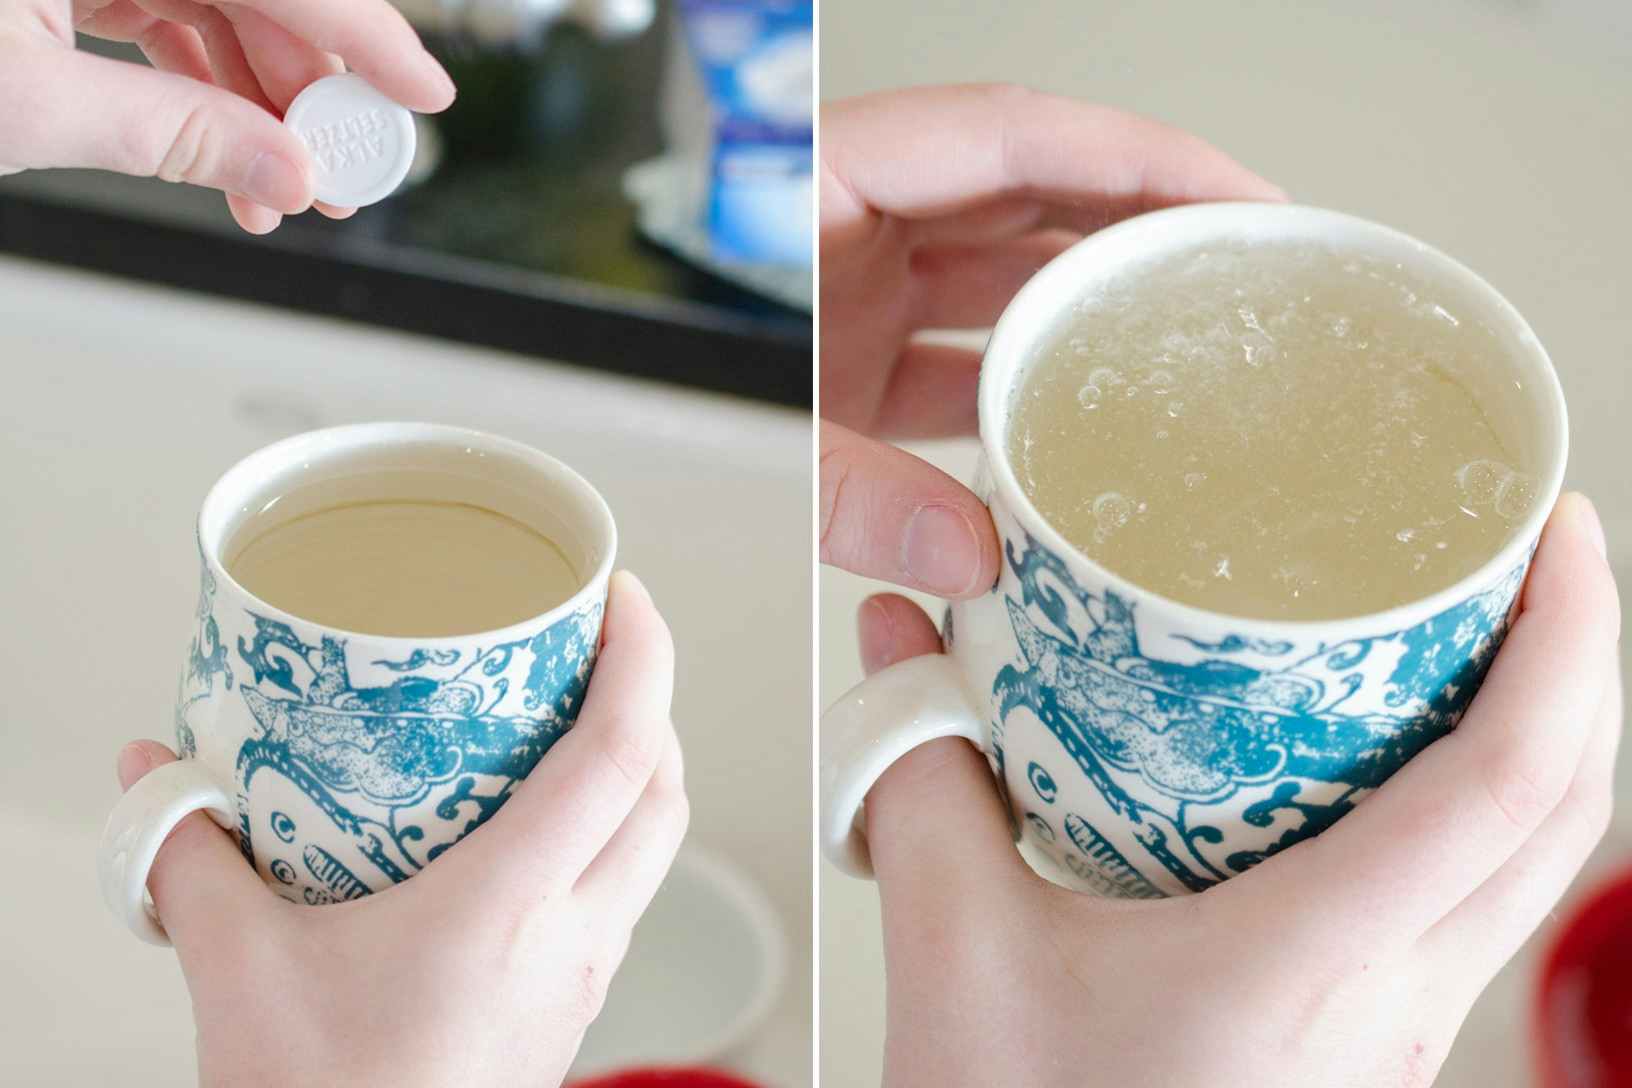 Clean coffee or tea stains in mugs and cups.